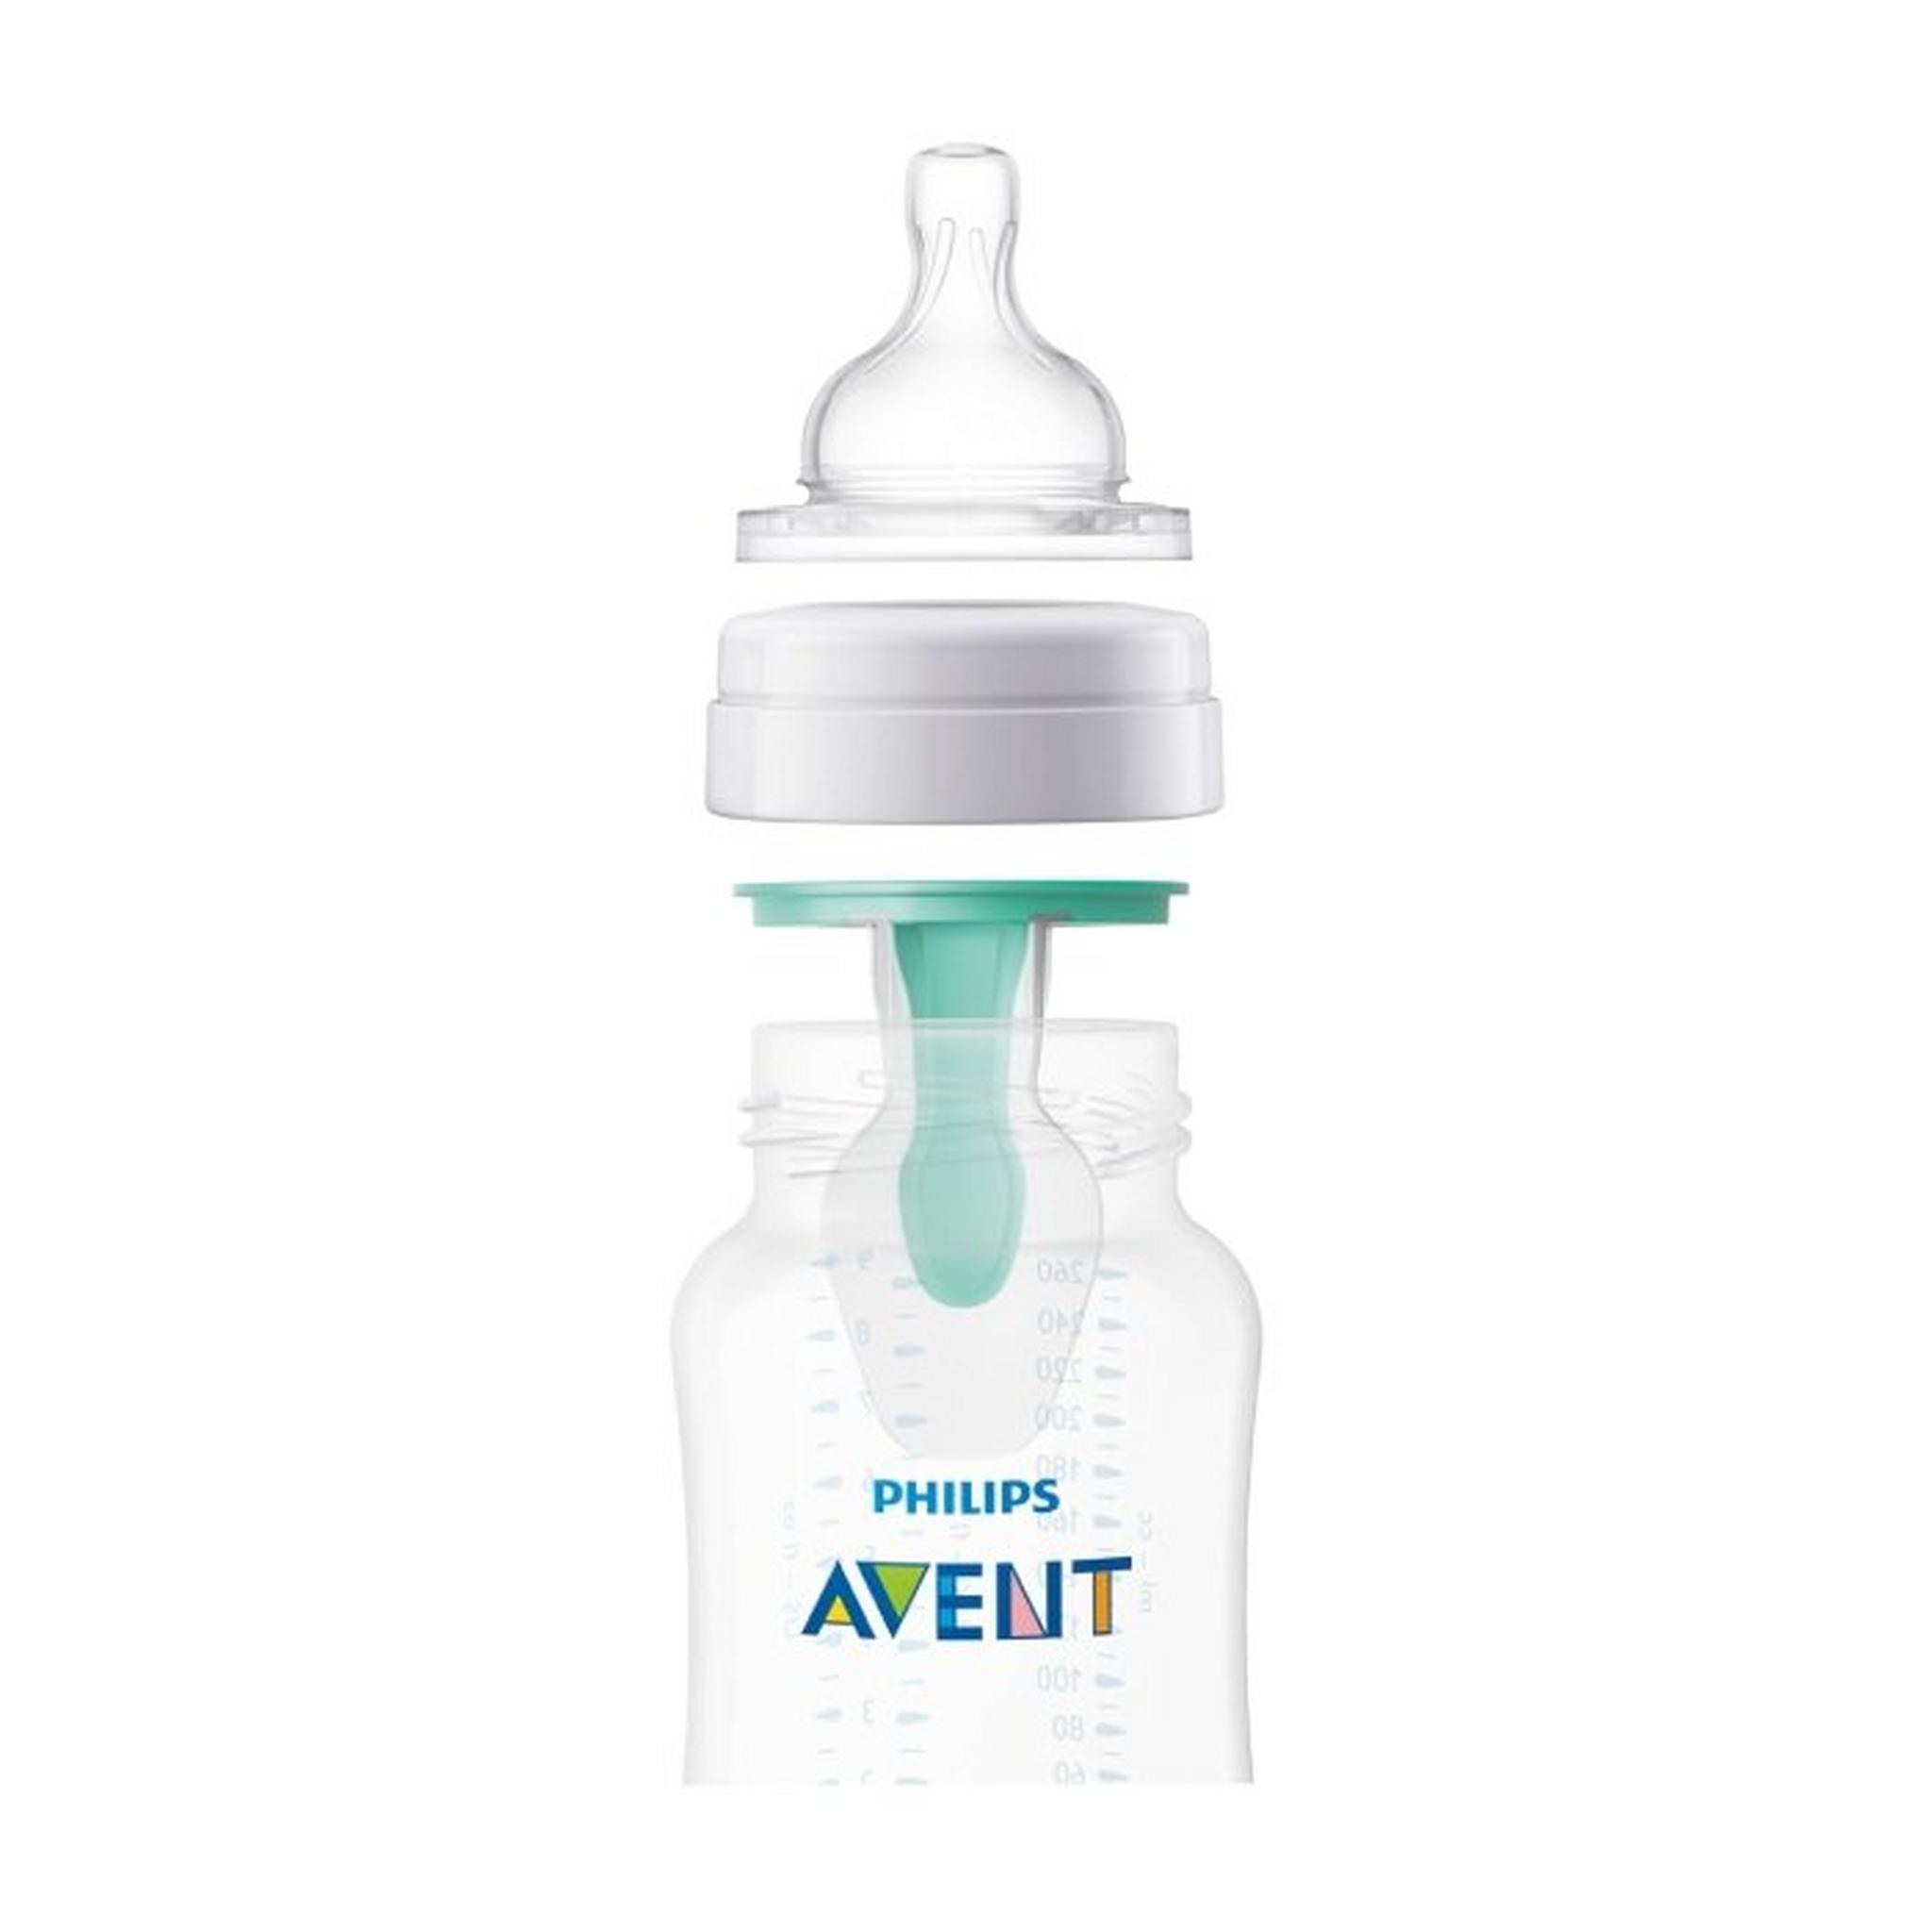 Philips Avent Anti-Colic With Airfree Vent Feeding Bottle 125ml - 2 Pcs